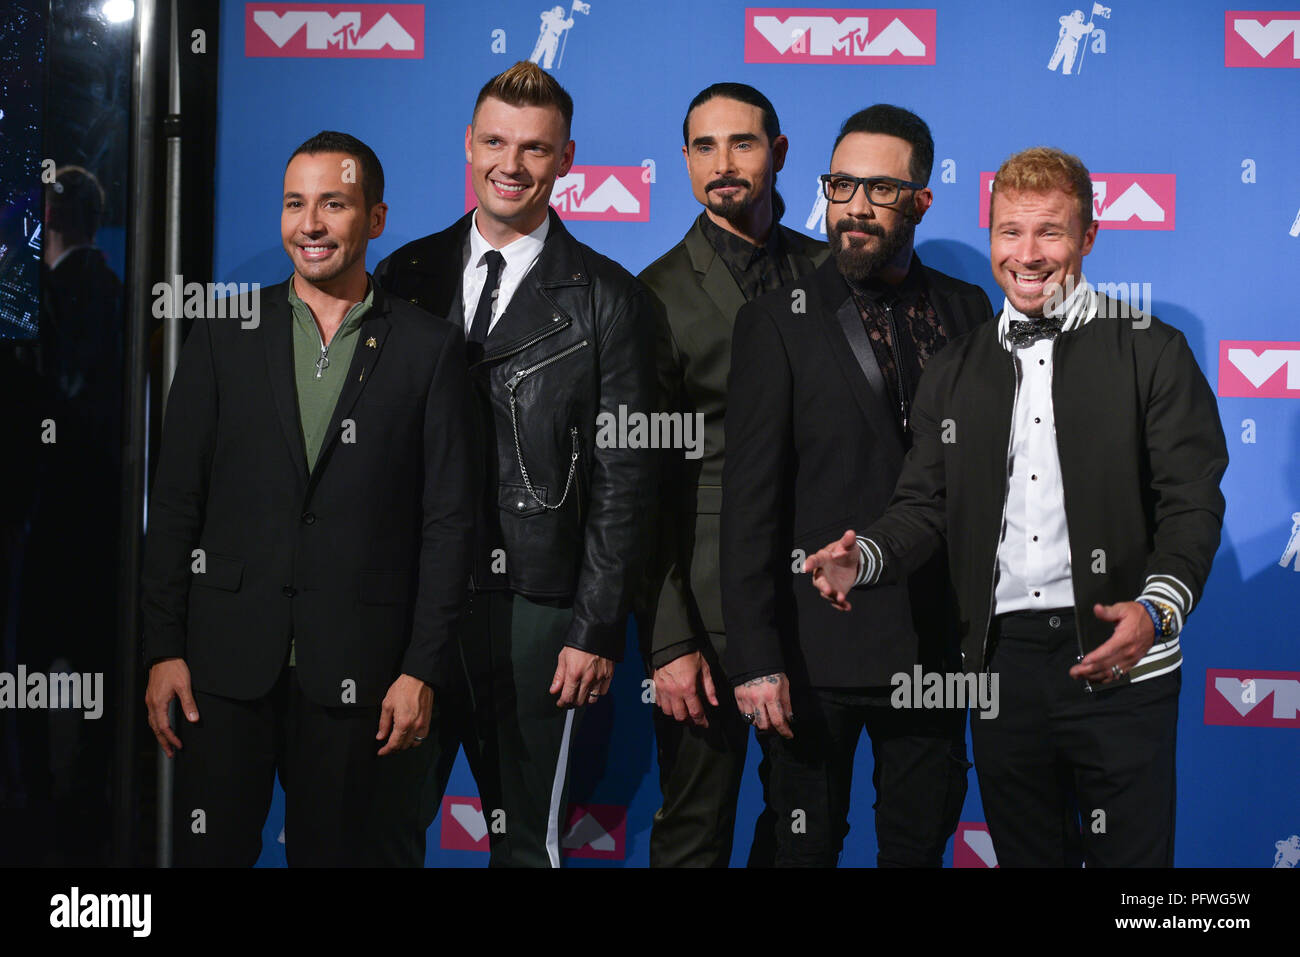 Backstreet Boys - A.J. McLean, Howie Dorough., Nick Carter, Kevin Richardson and Brian Littrell attend the 2018 MTV Video Music Awards at Radio City M Stock Photo